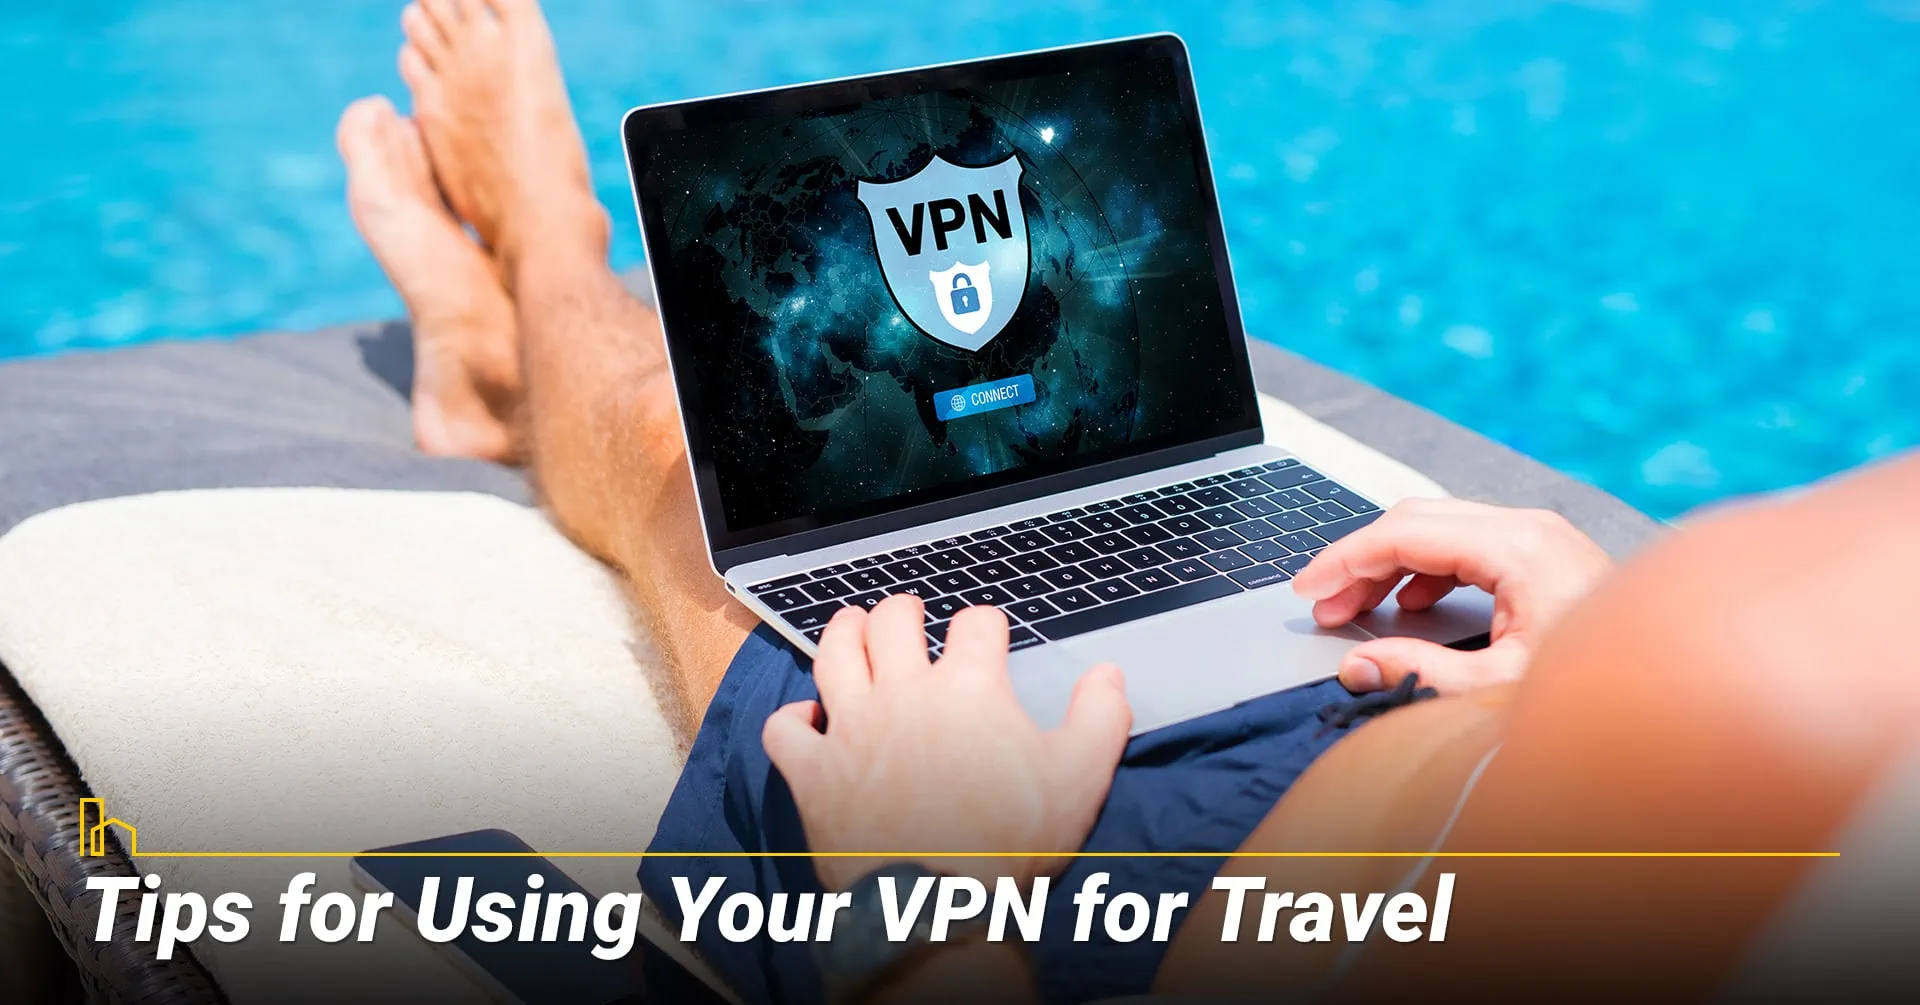 Tips for Using Your VPN for Travel